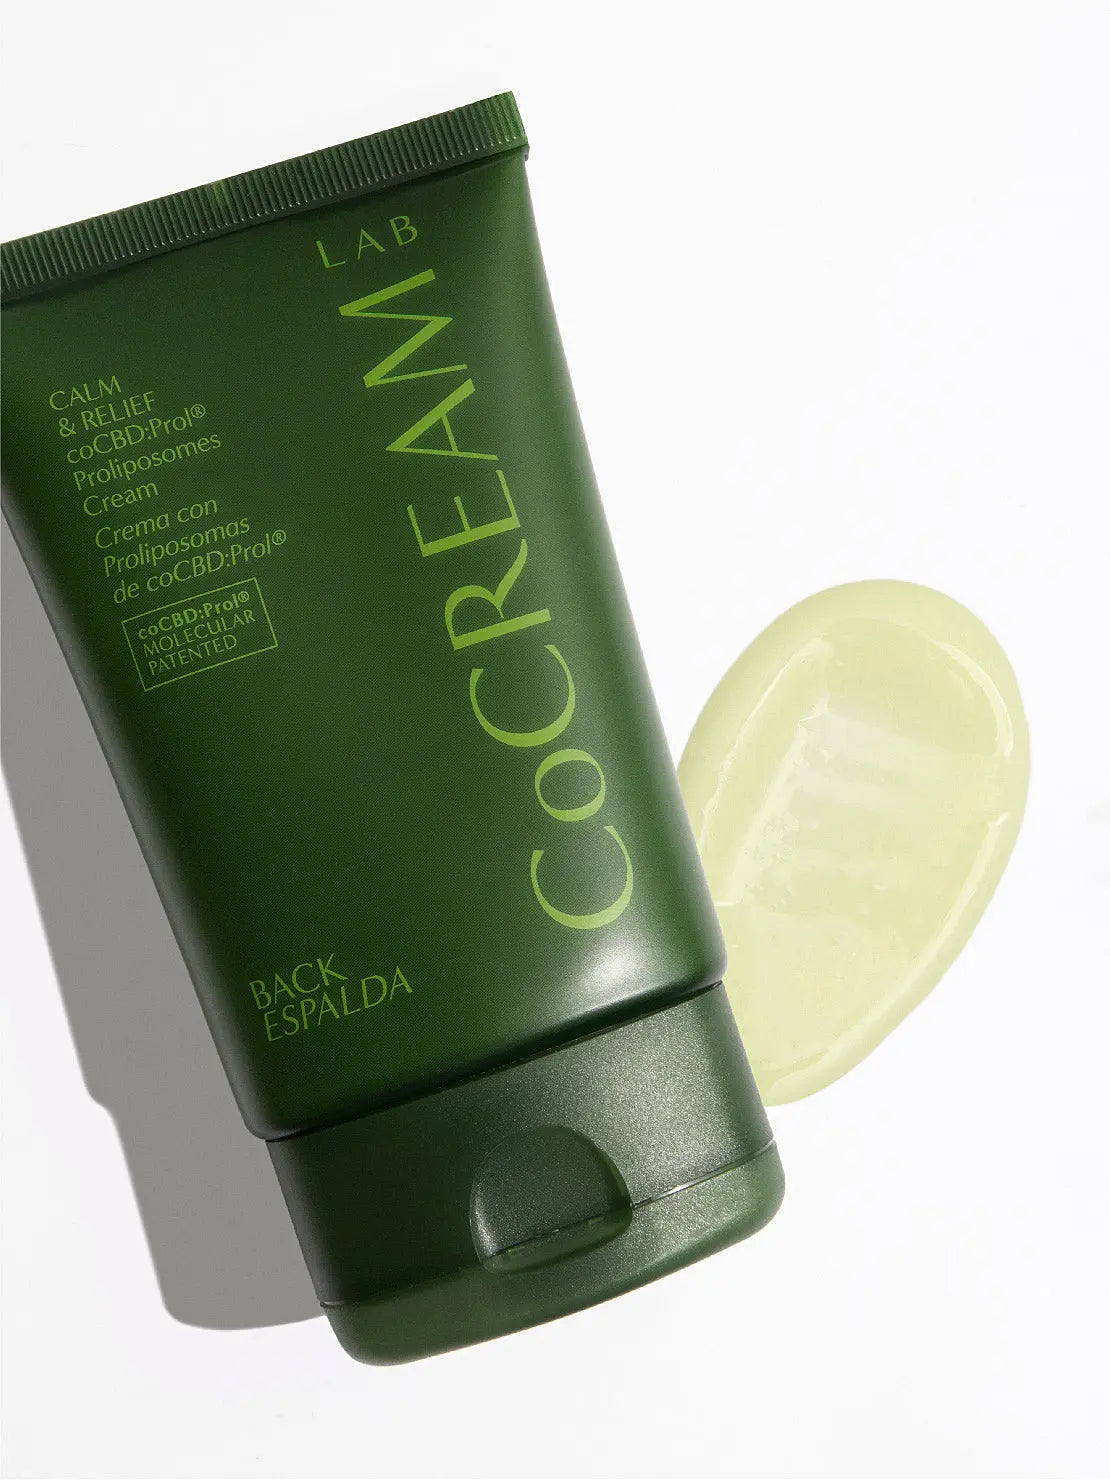 A green squeeze tube labeled "CoCream Lab" containing Back Cream 100ml is sold at Bassalstore in Barcelona. The text on the tube includes information in Spanish, mentioning features like "Calm & Relief" and "Crema con Polipéptidos." The packaging design is simple and minimalistic.